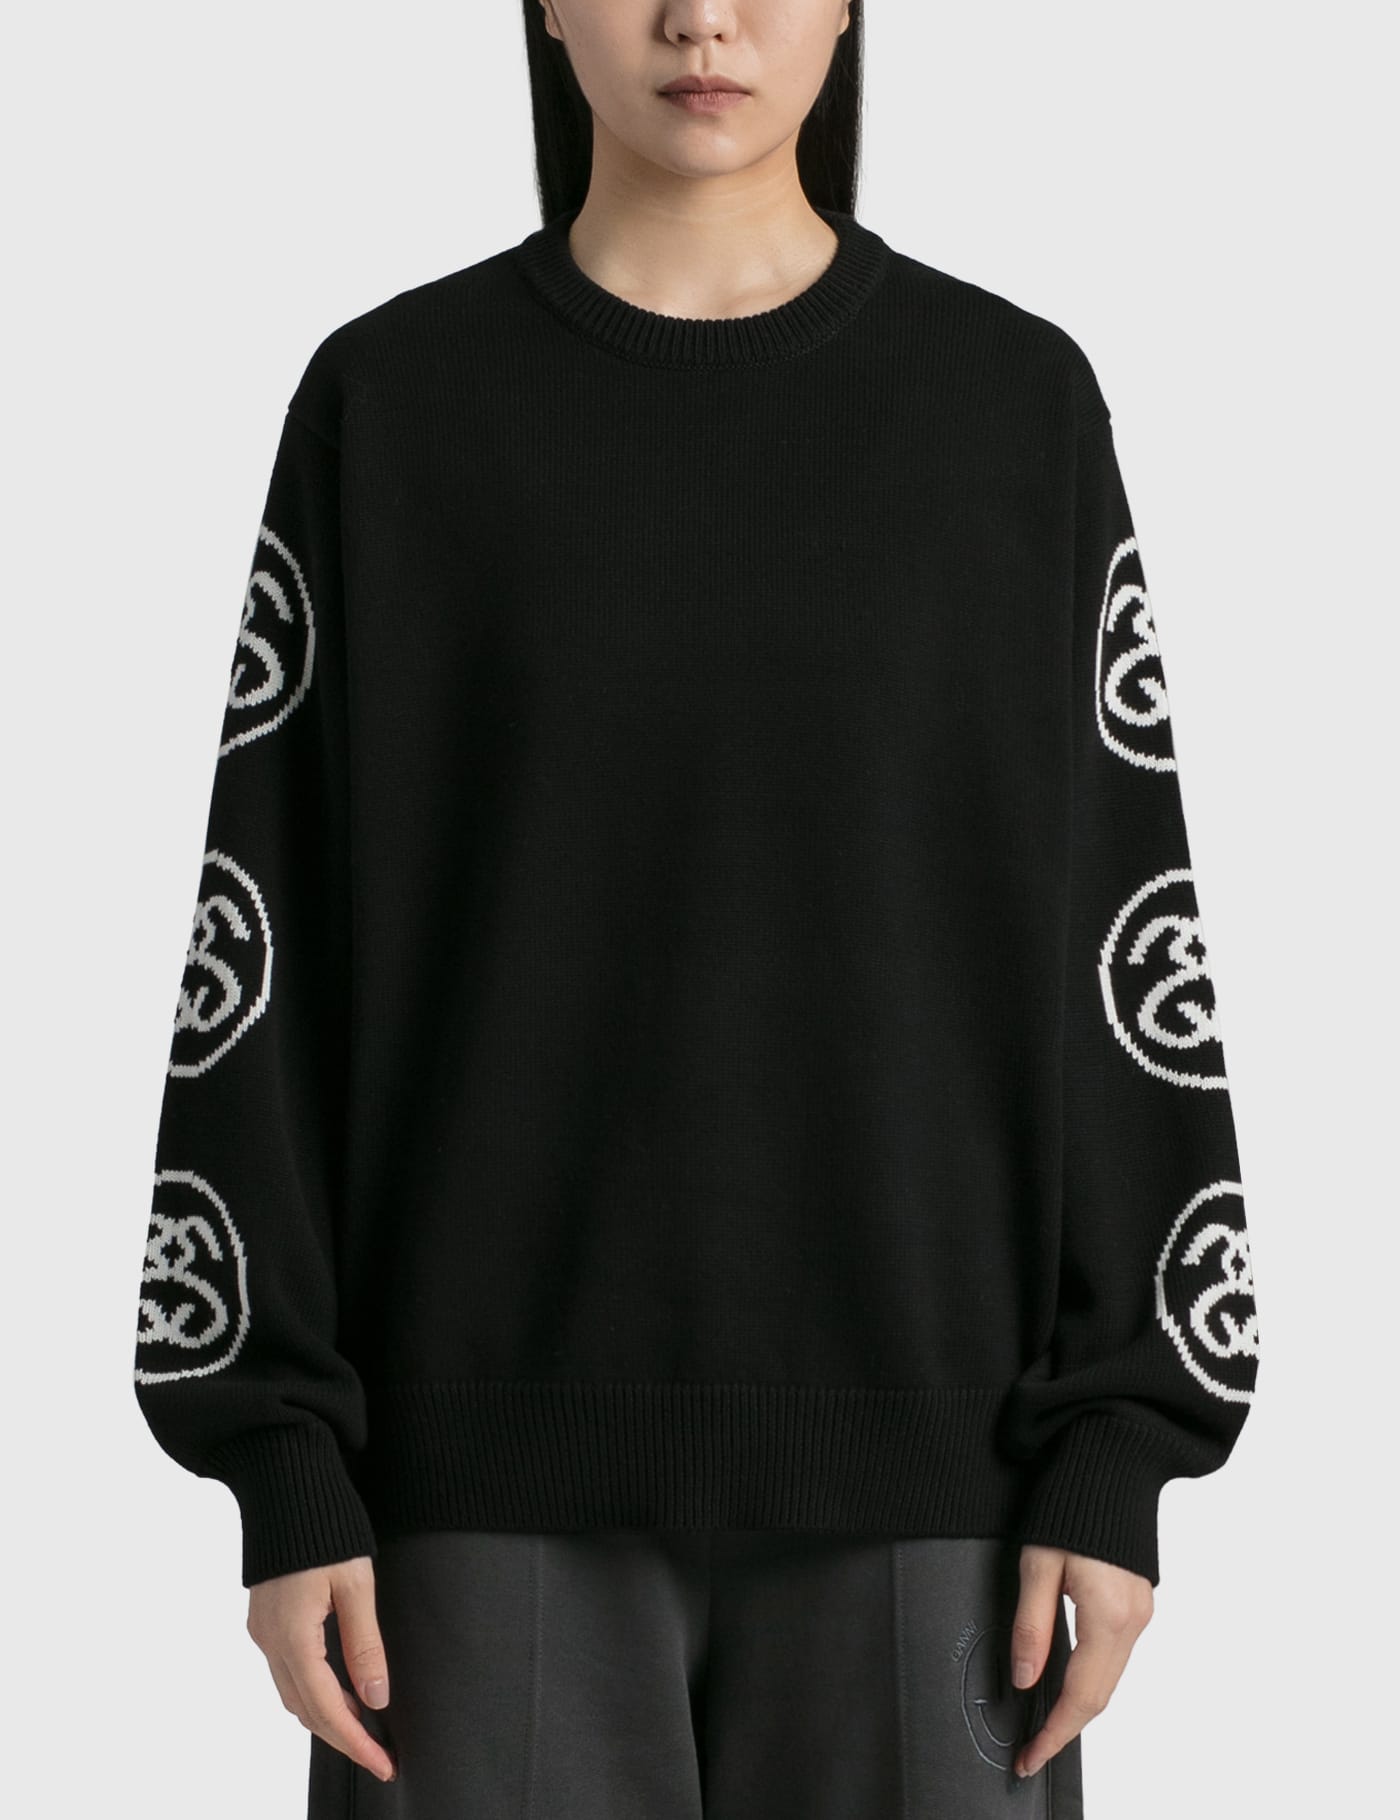 Stüssy - SS-Link Sweater | HBX - Globally Curated Fashion and